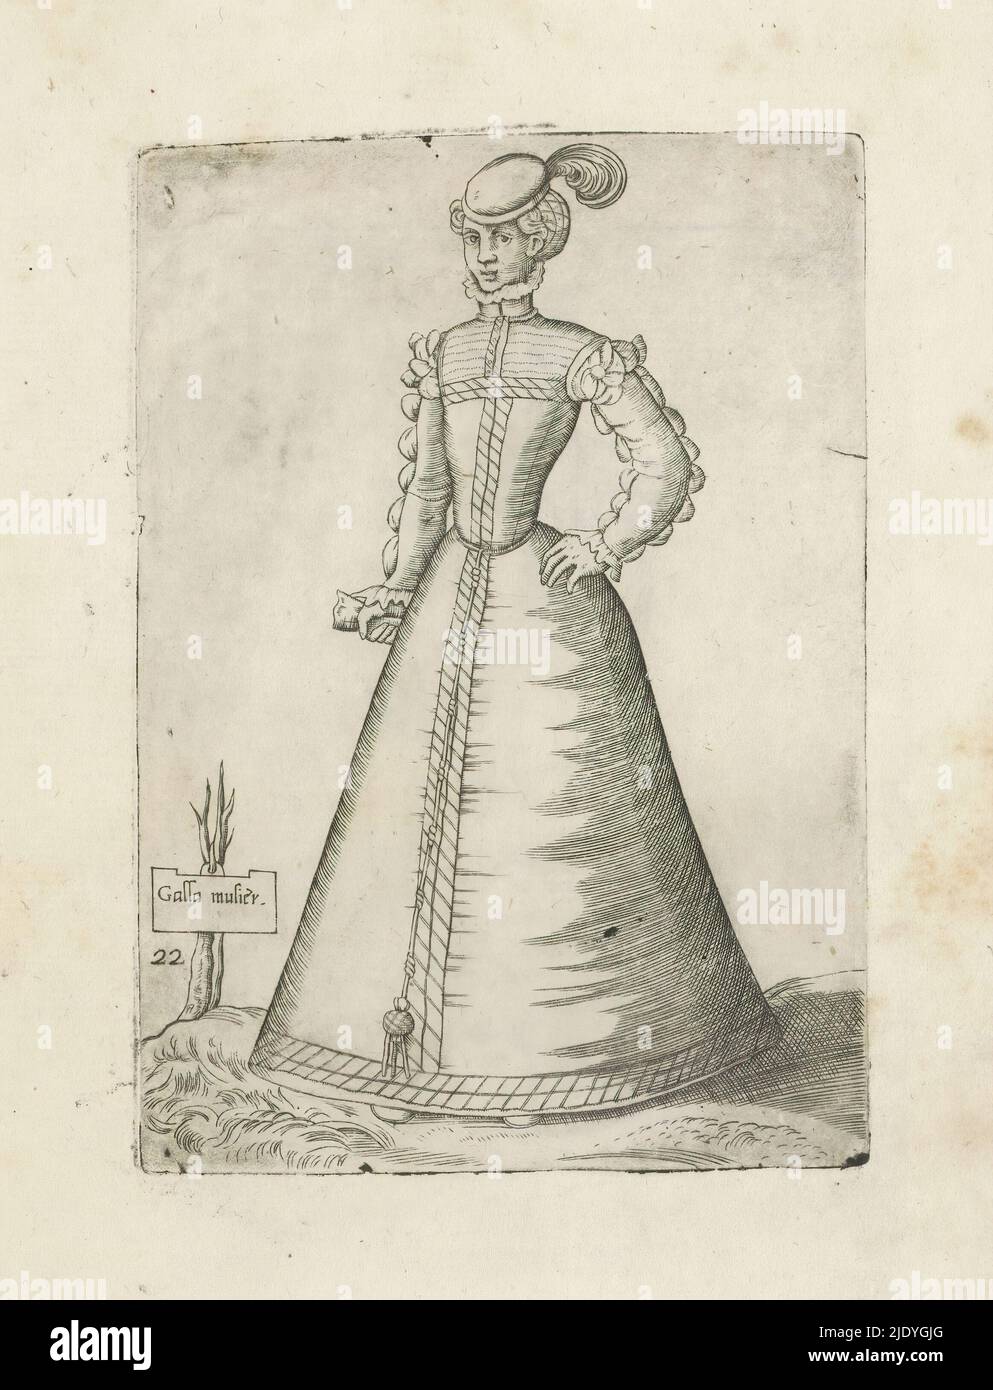 A married woman from France, Galla mulier (title on object), Omnium fere gentium nostrae aetatis habitus, nunquam ante hac aediti (series title), A married woman from France, seen from the front, turned slightly to the left. Glove in left hand. Hat with feather on head. dressed according to the fashion of ca. 1550. Part of the costume book entitled 'Omnium fere gentium nostrae aetatis habitus, nunquam ante hac aediti', Venice 1569. Reissue from 1569 of the first edition from 1563., print maker: Ferando Bertelli, after print by: Enea Vico, publisher: Ferando Bertelli, Venice, 1569, paper, engra Stock Photo